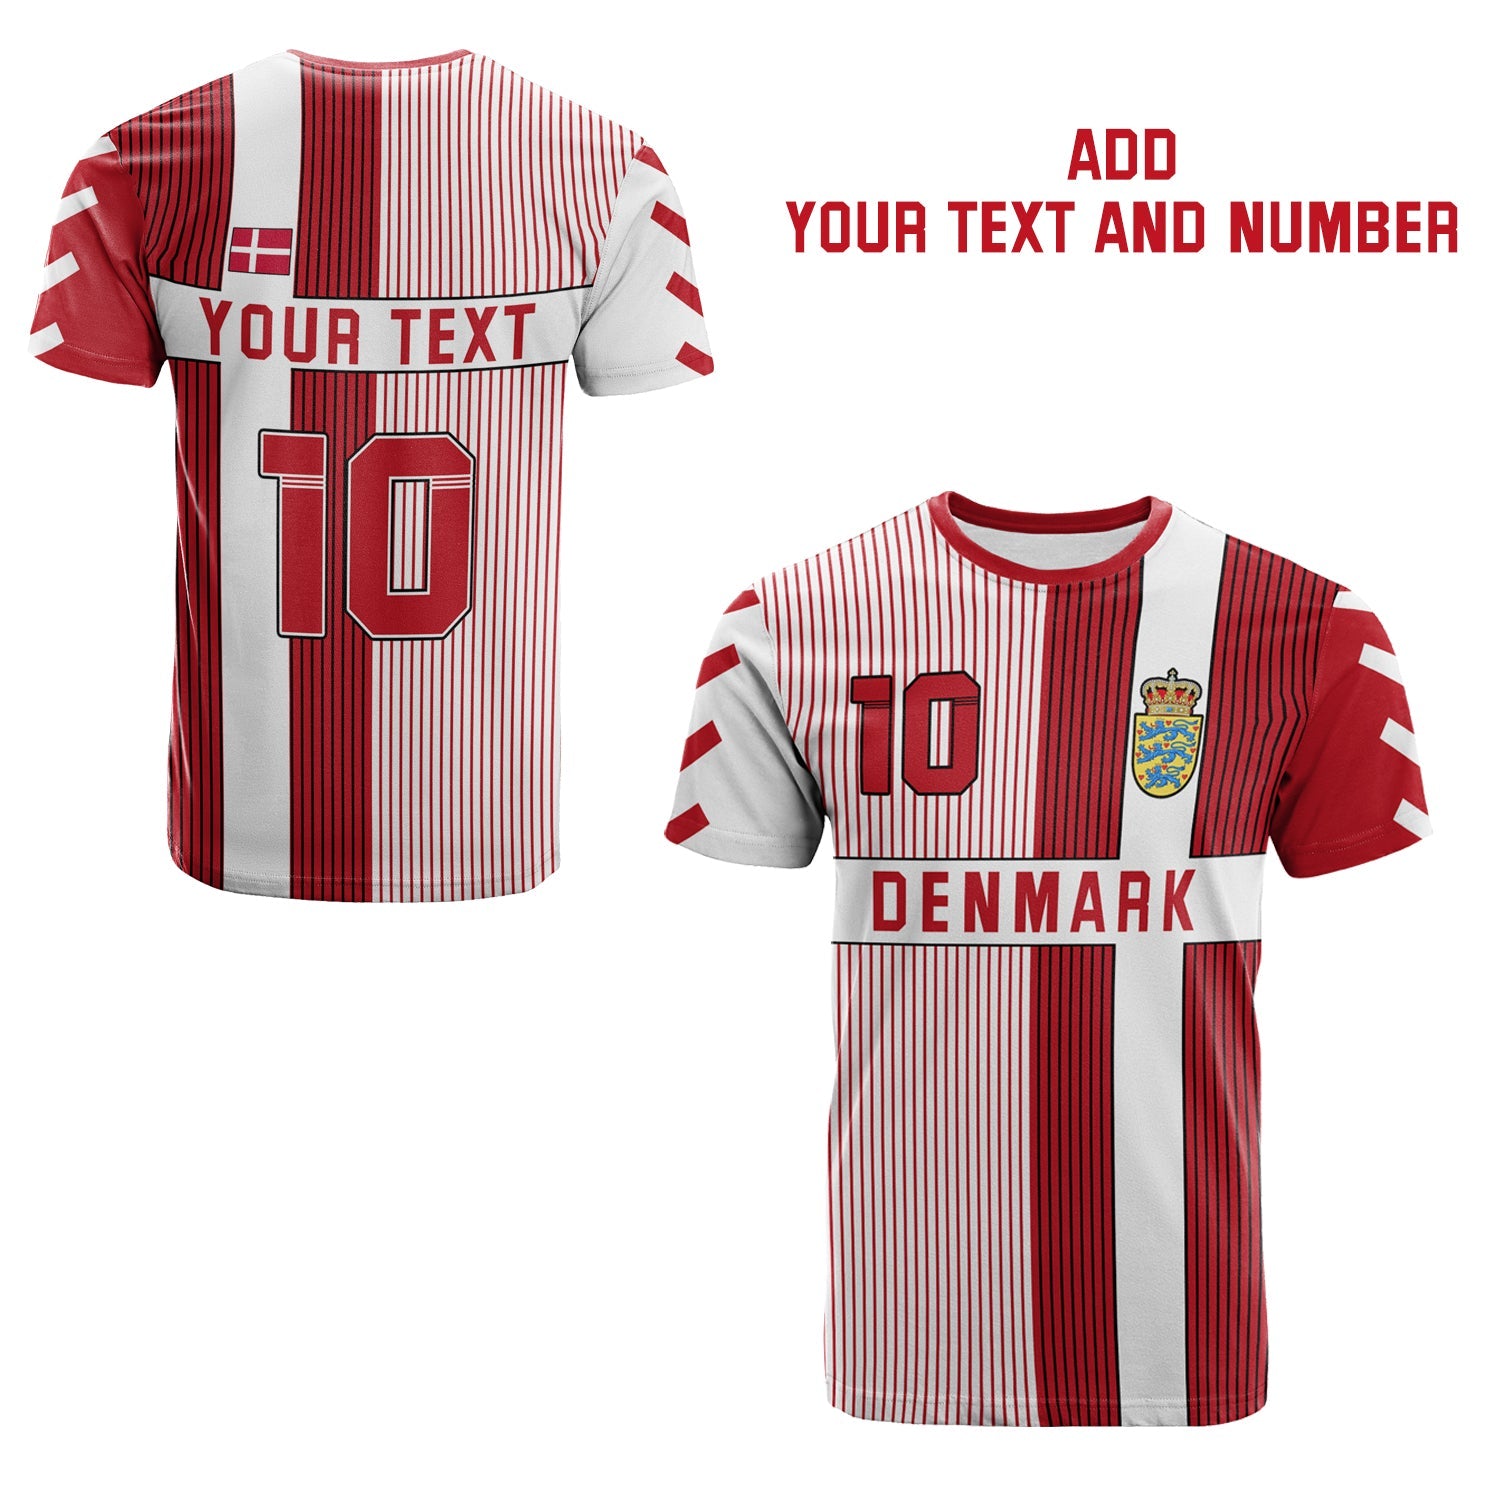 custom-personalised-denmark-football-t-shirt-come-on-denmark-custom-text-and-number